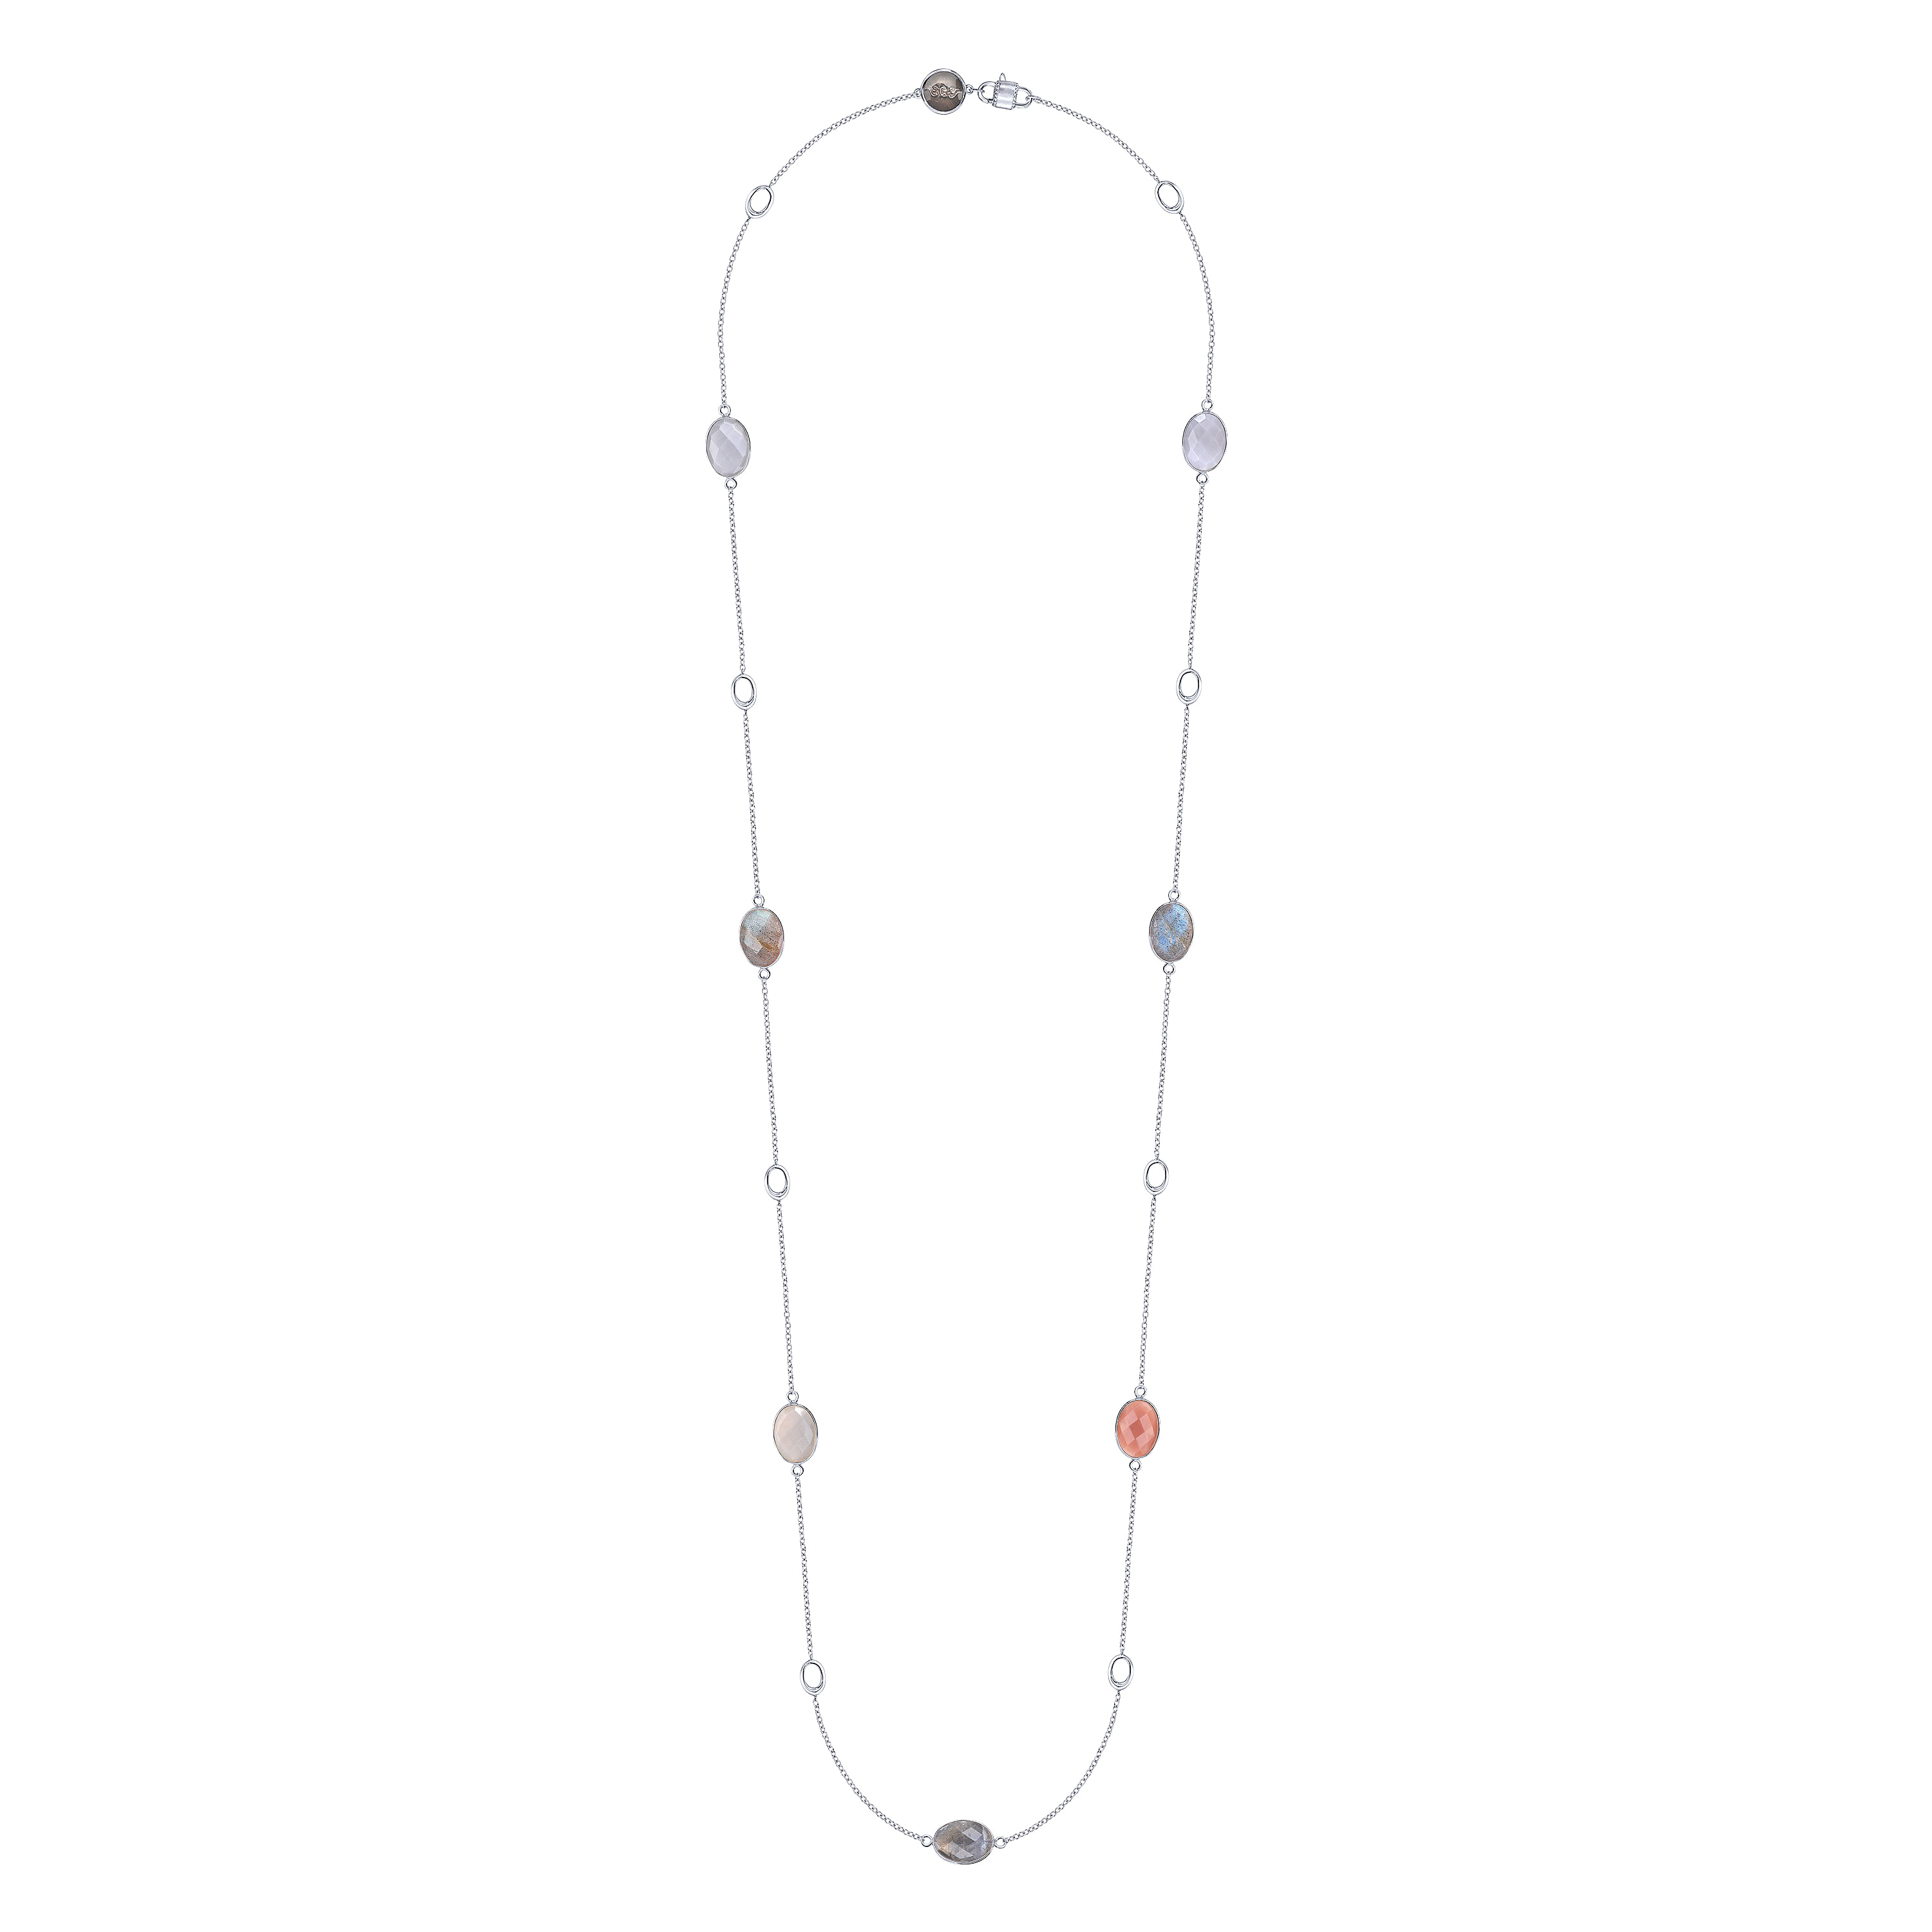 36 inch 925 Sterling Silver Labradorite and Mixed Moonstone Station Necklace